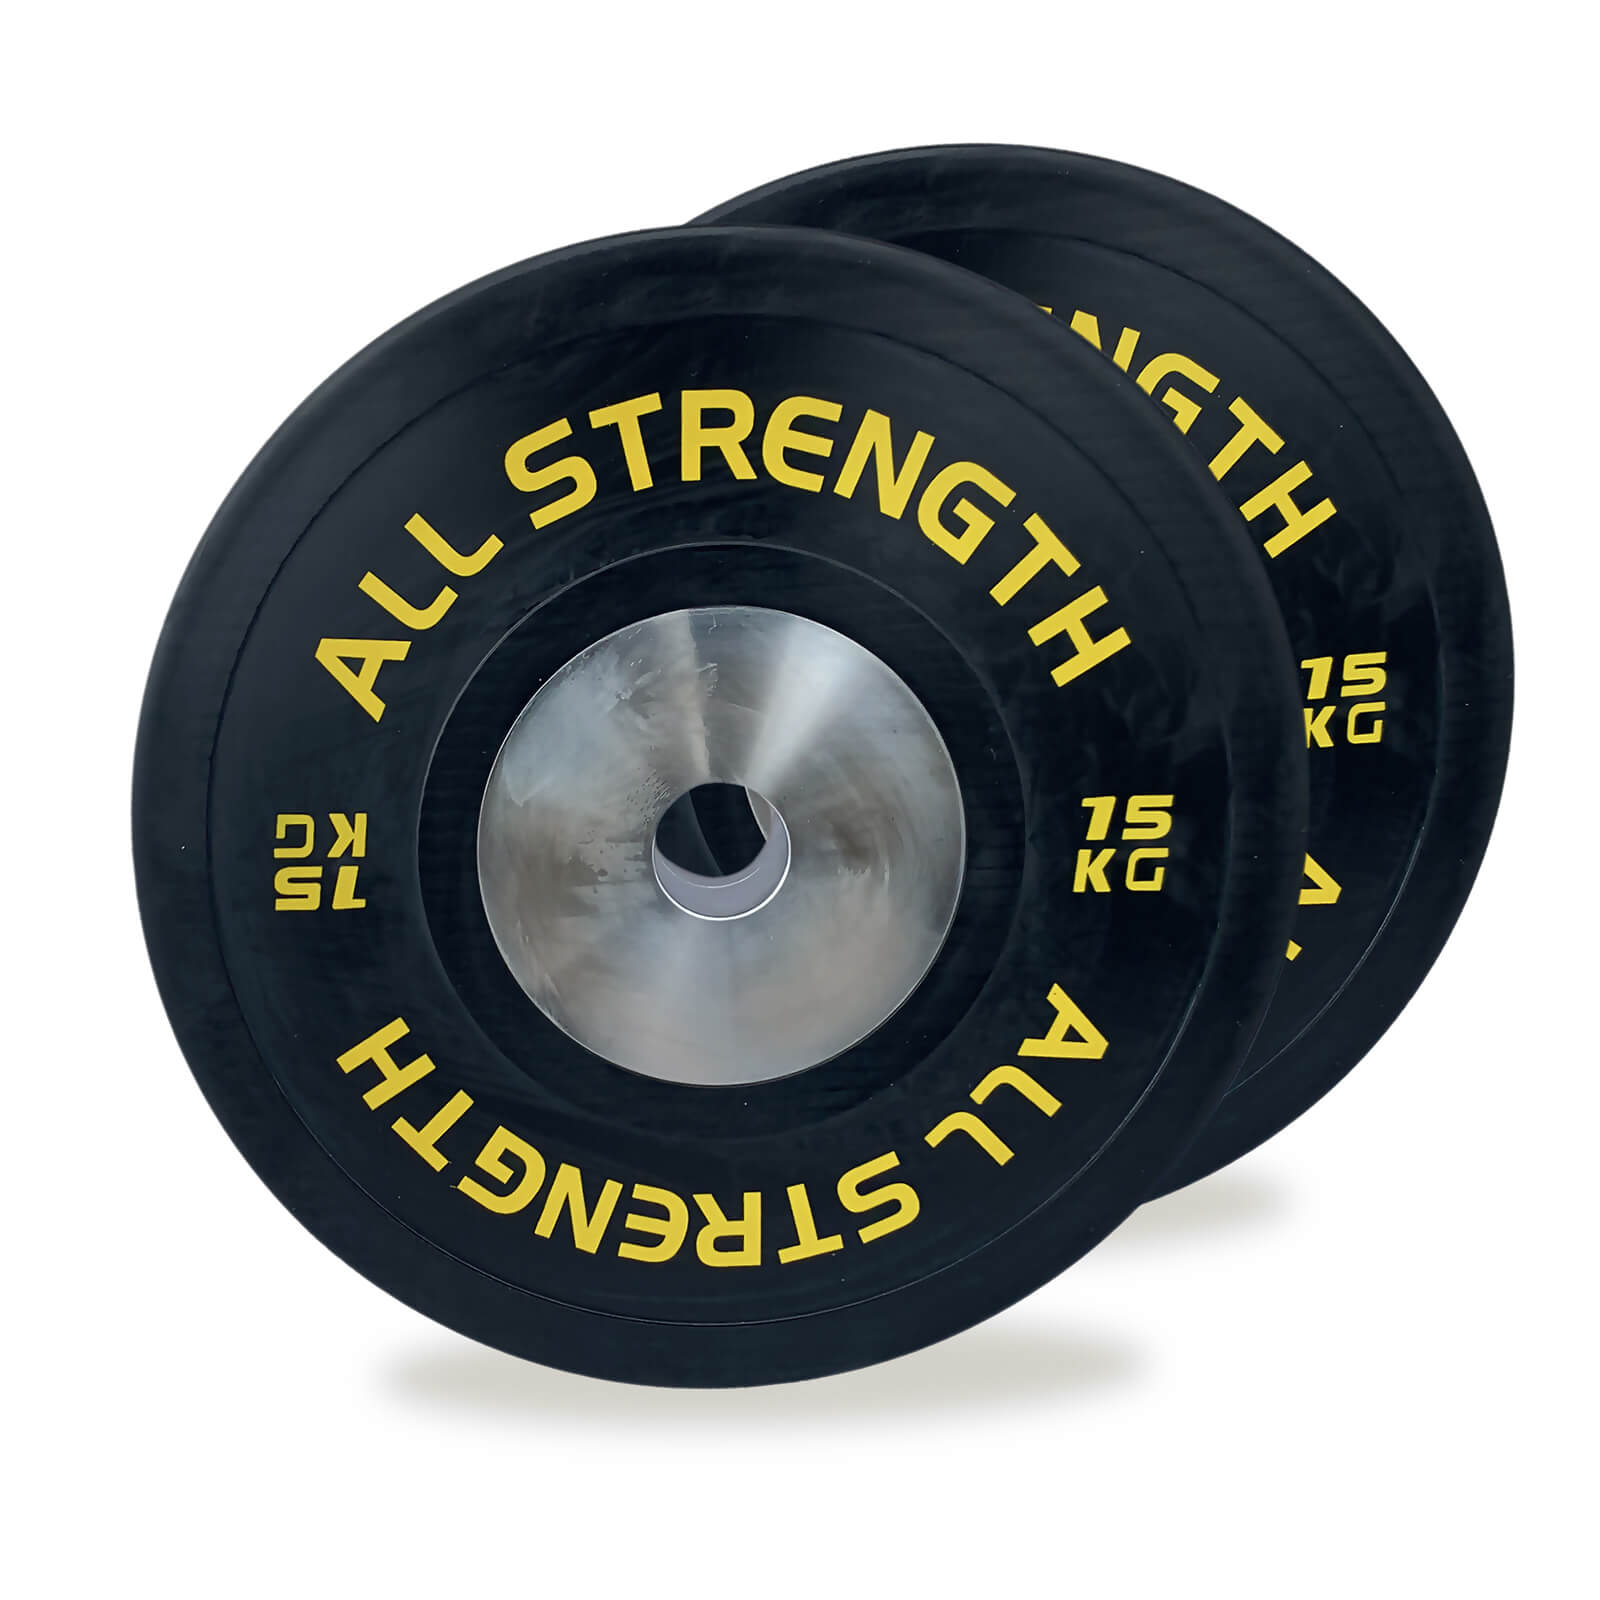 Competition Bumper Plates, 2 x 15 kg, AllStrength